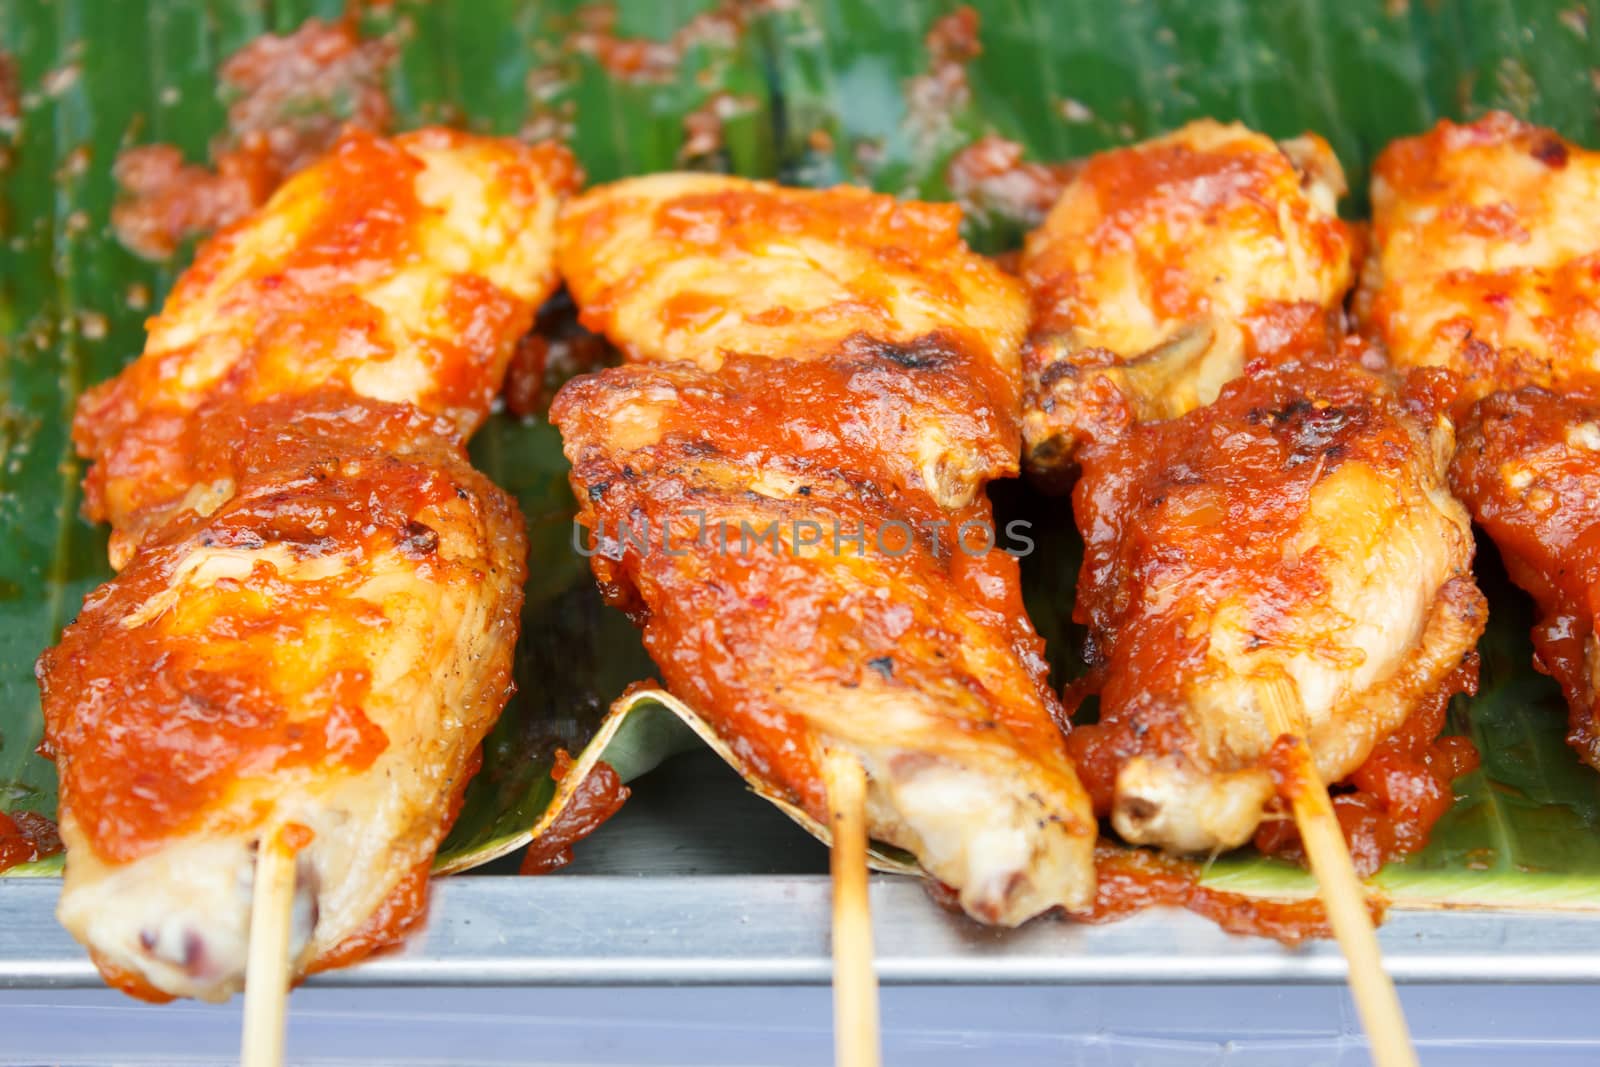 Grilled Chicken Wing with Spicy Sauce  by vitawin